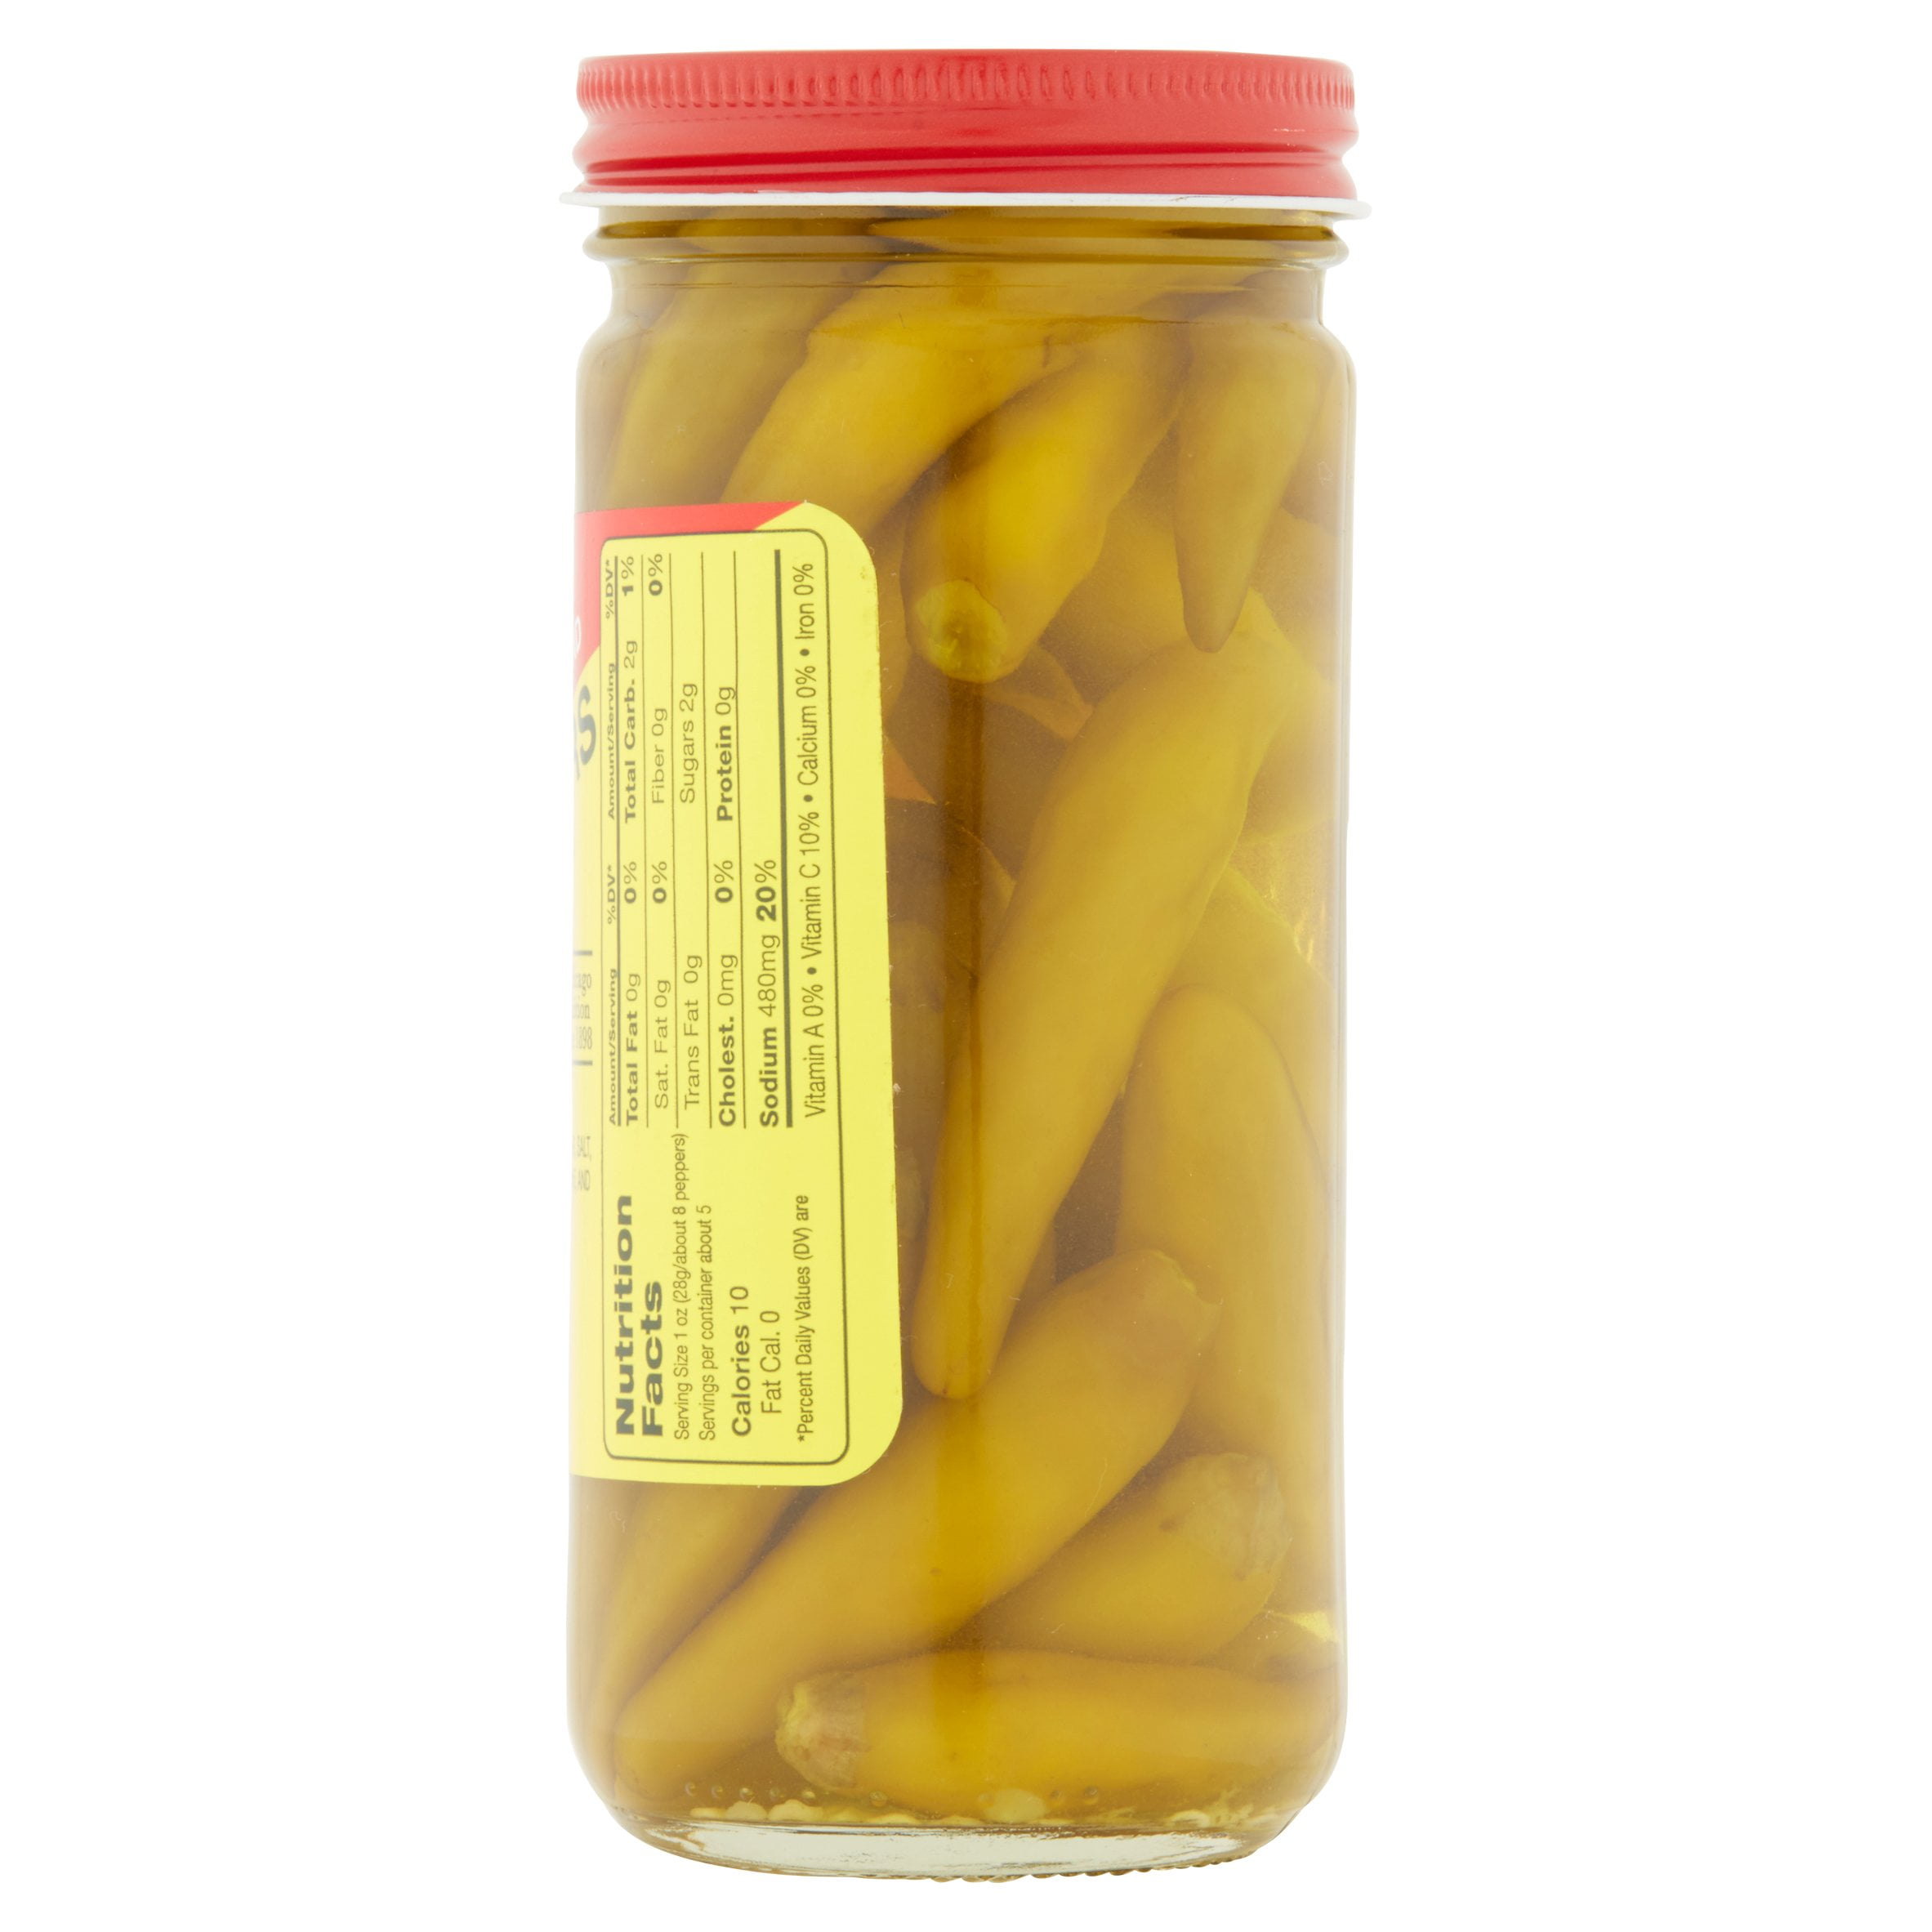 Sport Peppers - 8oz - That Pickle Guy